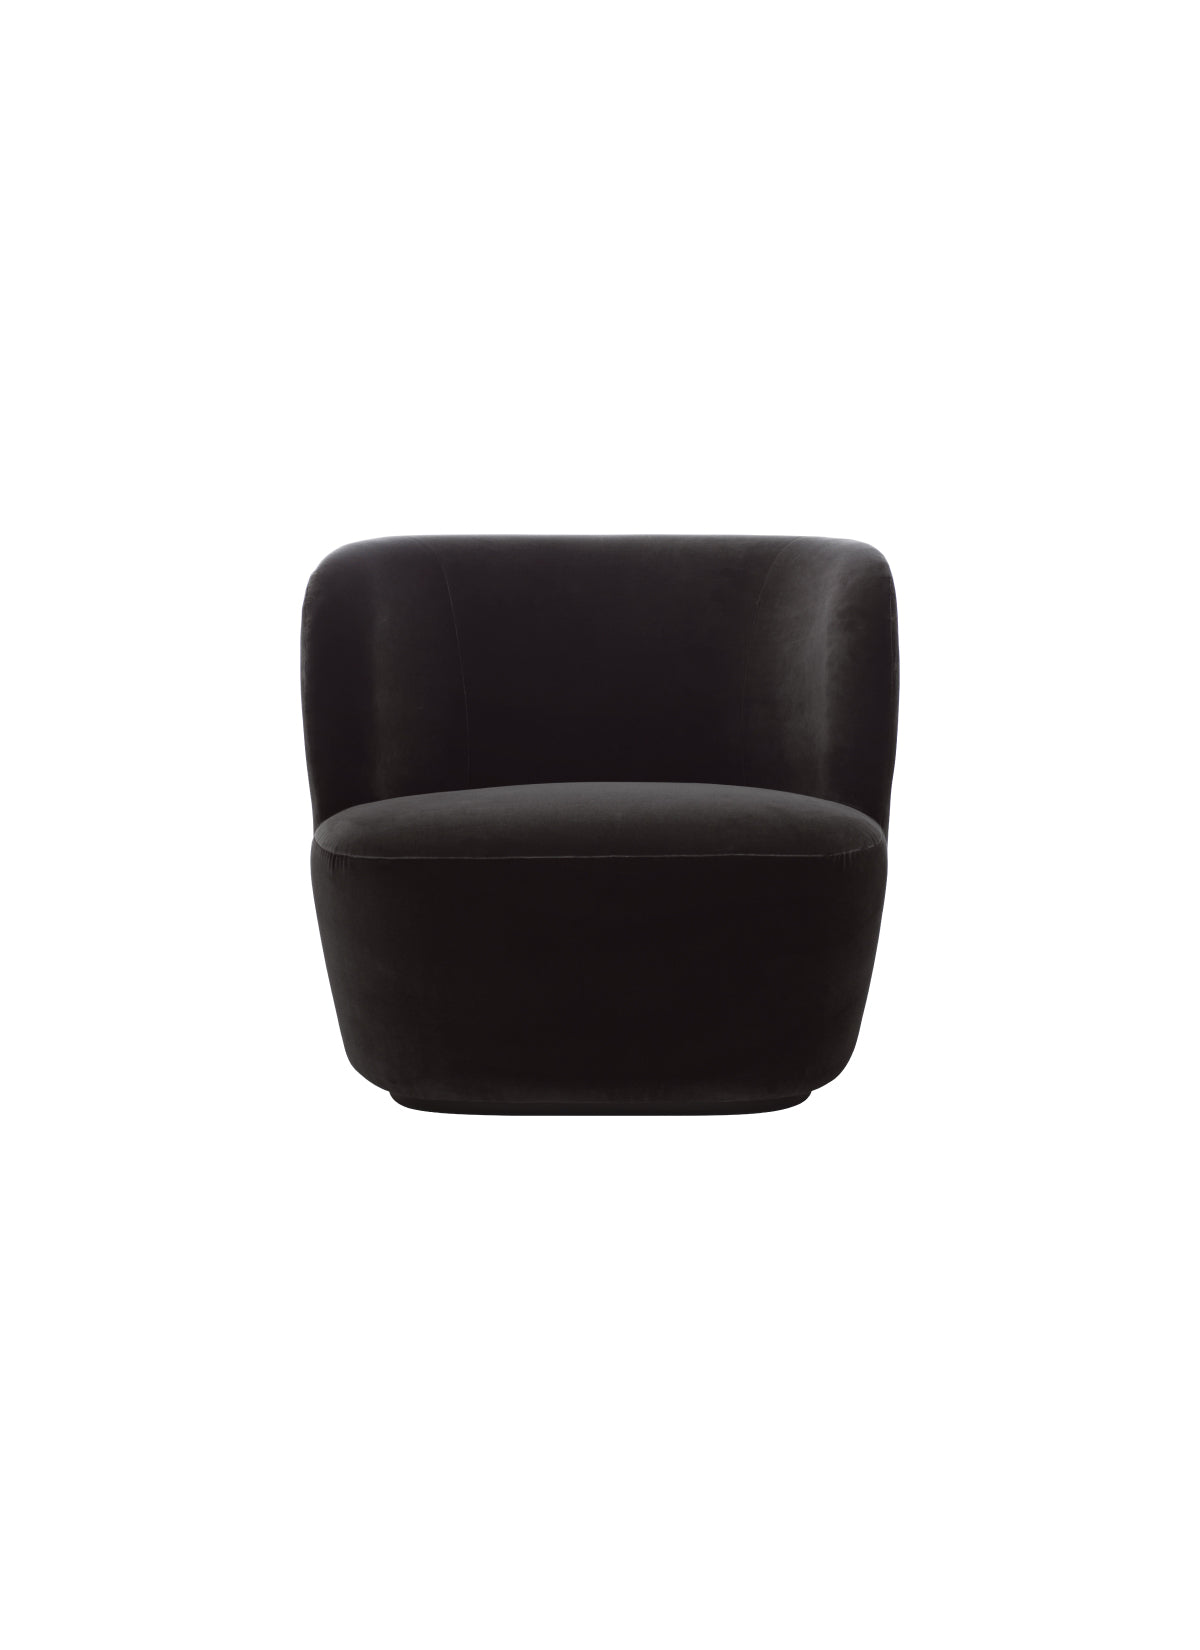 Stay Lounge Chair - Large - Black Base by Gubi